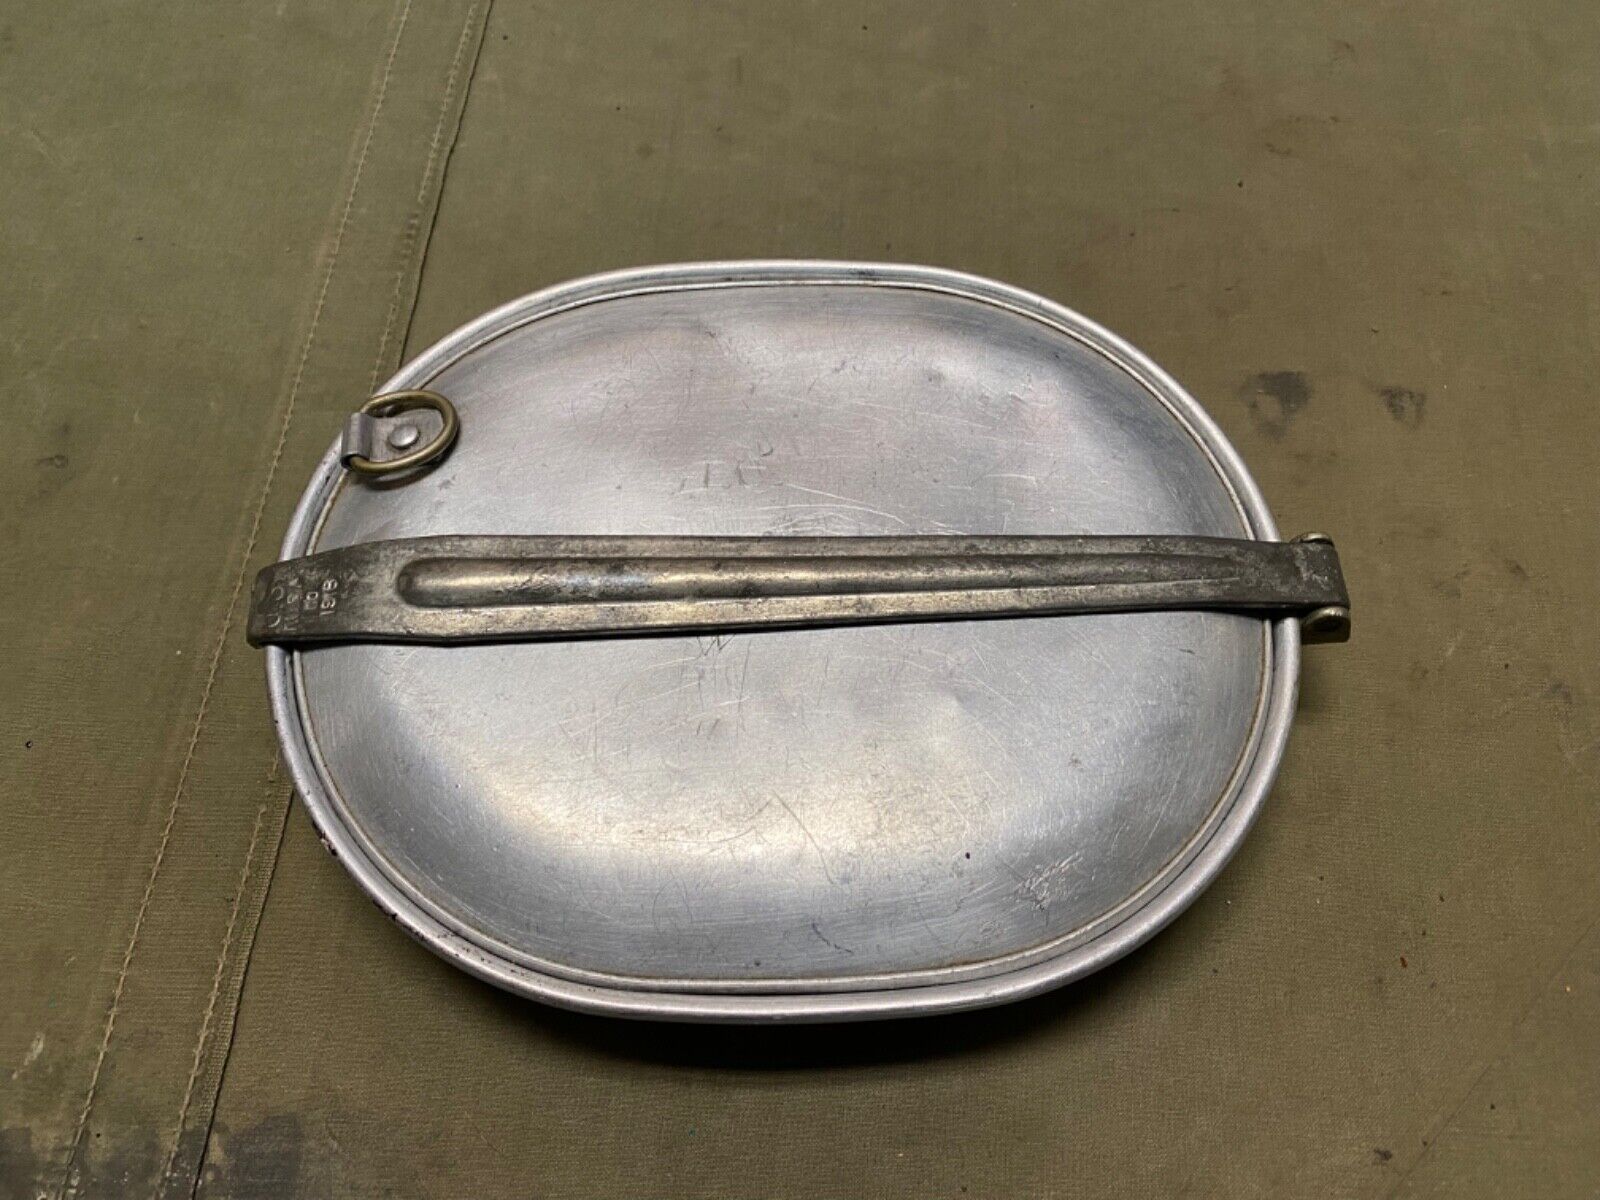 ORIGINAL WWI WWII US ARMY M1910 MESS KIT-DATED 1917, NAMED